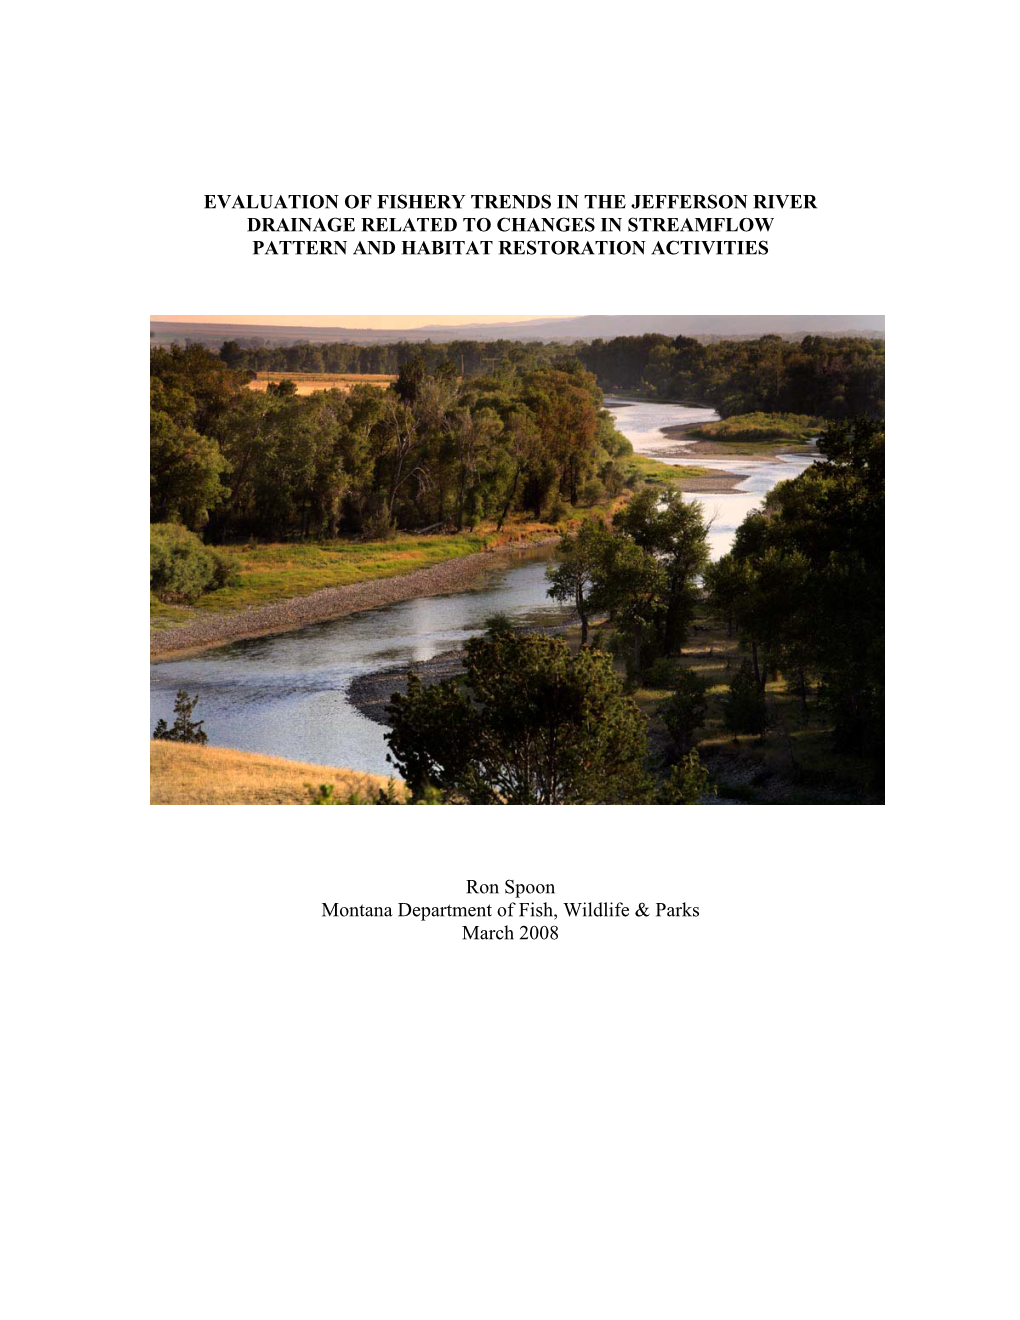 Evaluation of Fishery Trends in the Jefferson River Drainage Related to Changes in Streamflow Pattern and Habitat Restoration Activities